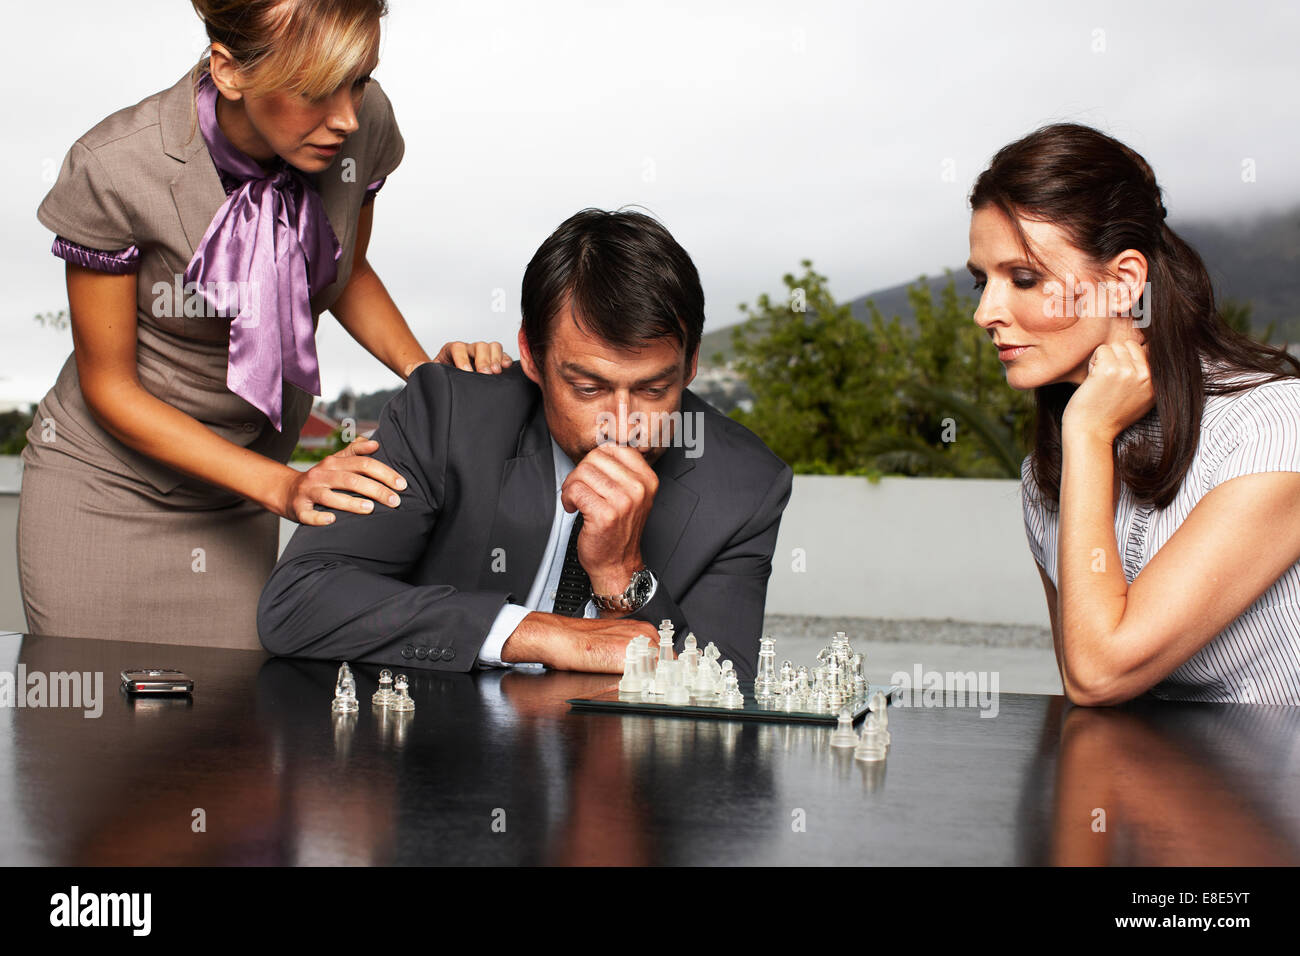 Manipulation in business Stock Photo